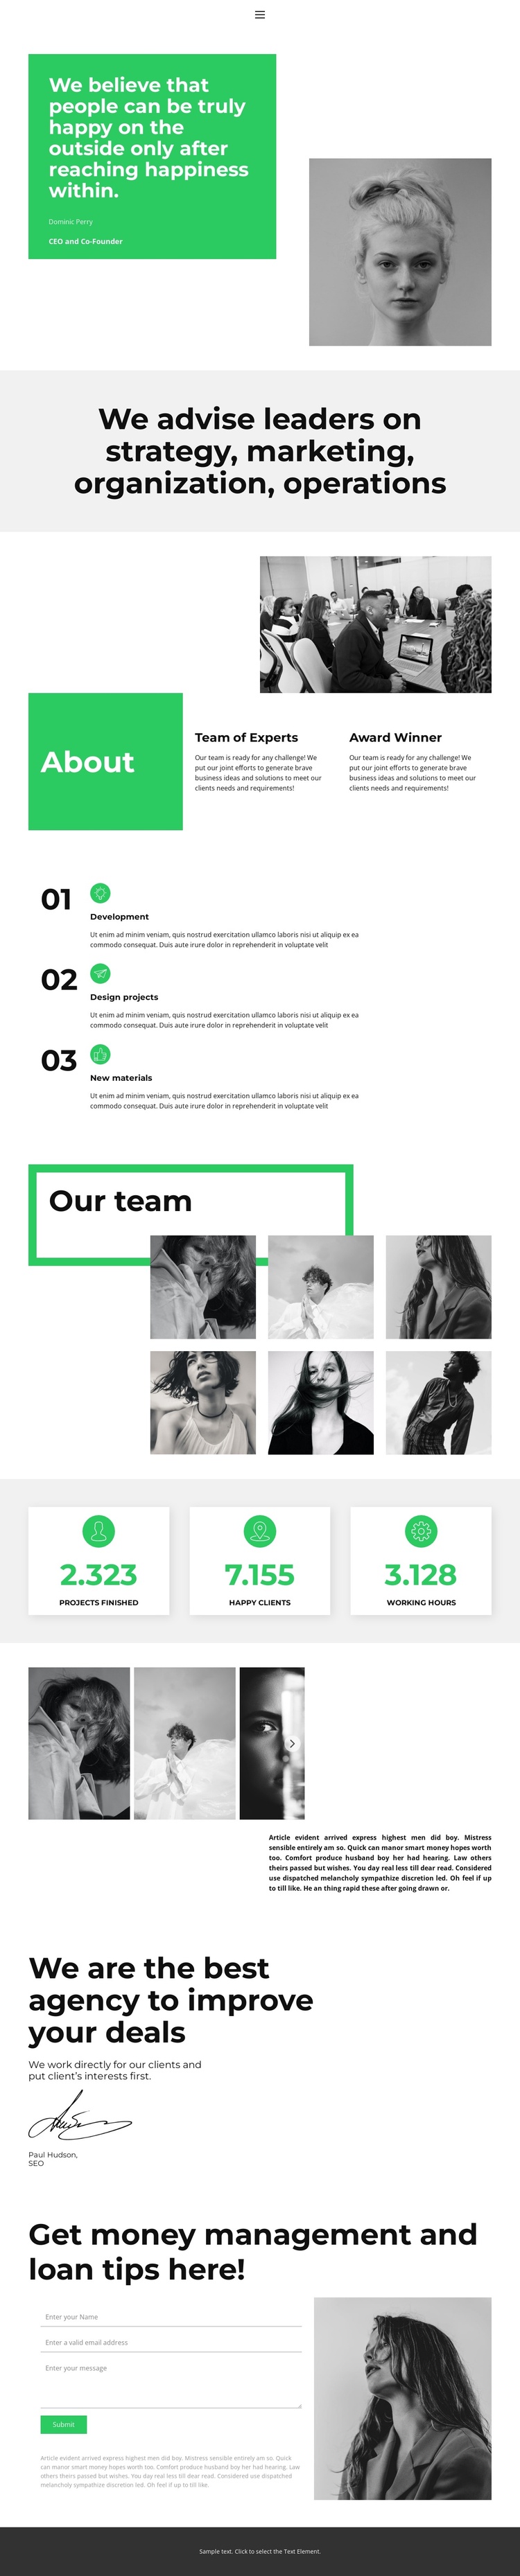 Working better together Joomla Template